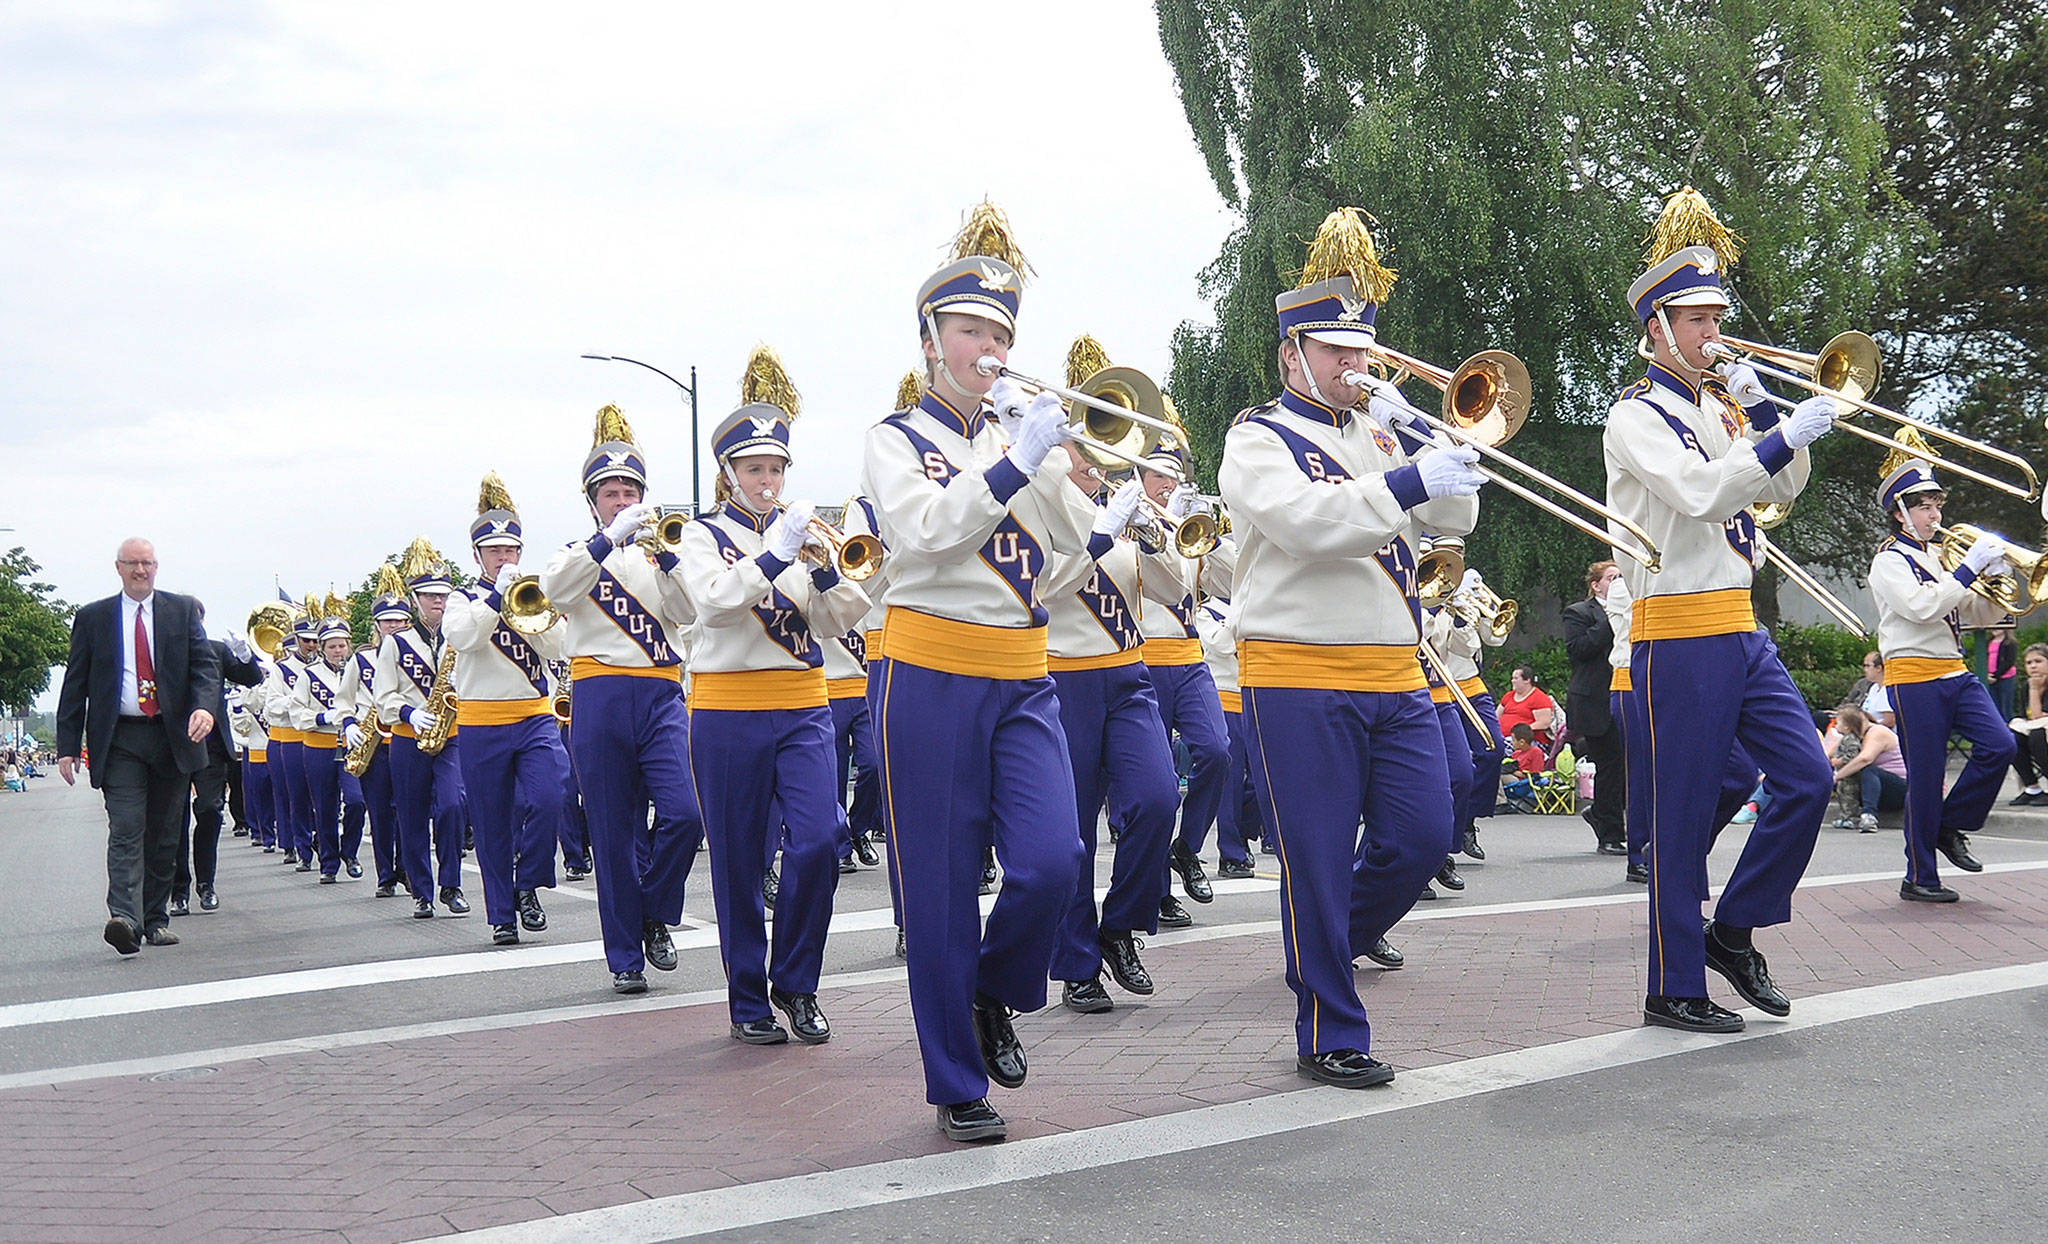 Sequim’s annual Irrigation Festival Grand Parade sees about 100 entries each year including the Sequim High School Marching Band, seen here in 2016’s parade. Sequim Gazette file photo by Michael Dashiell